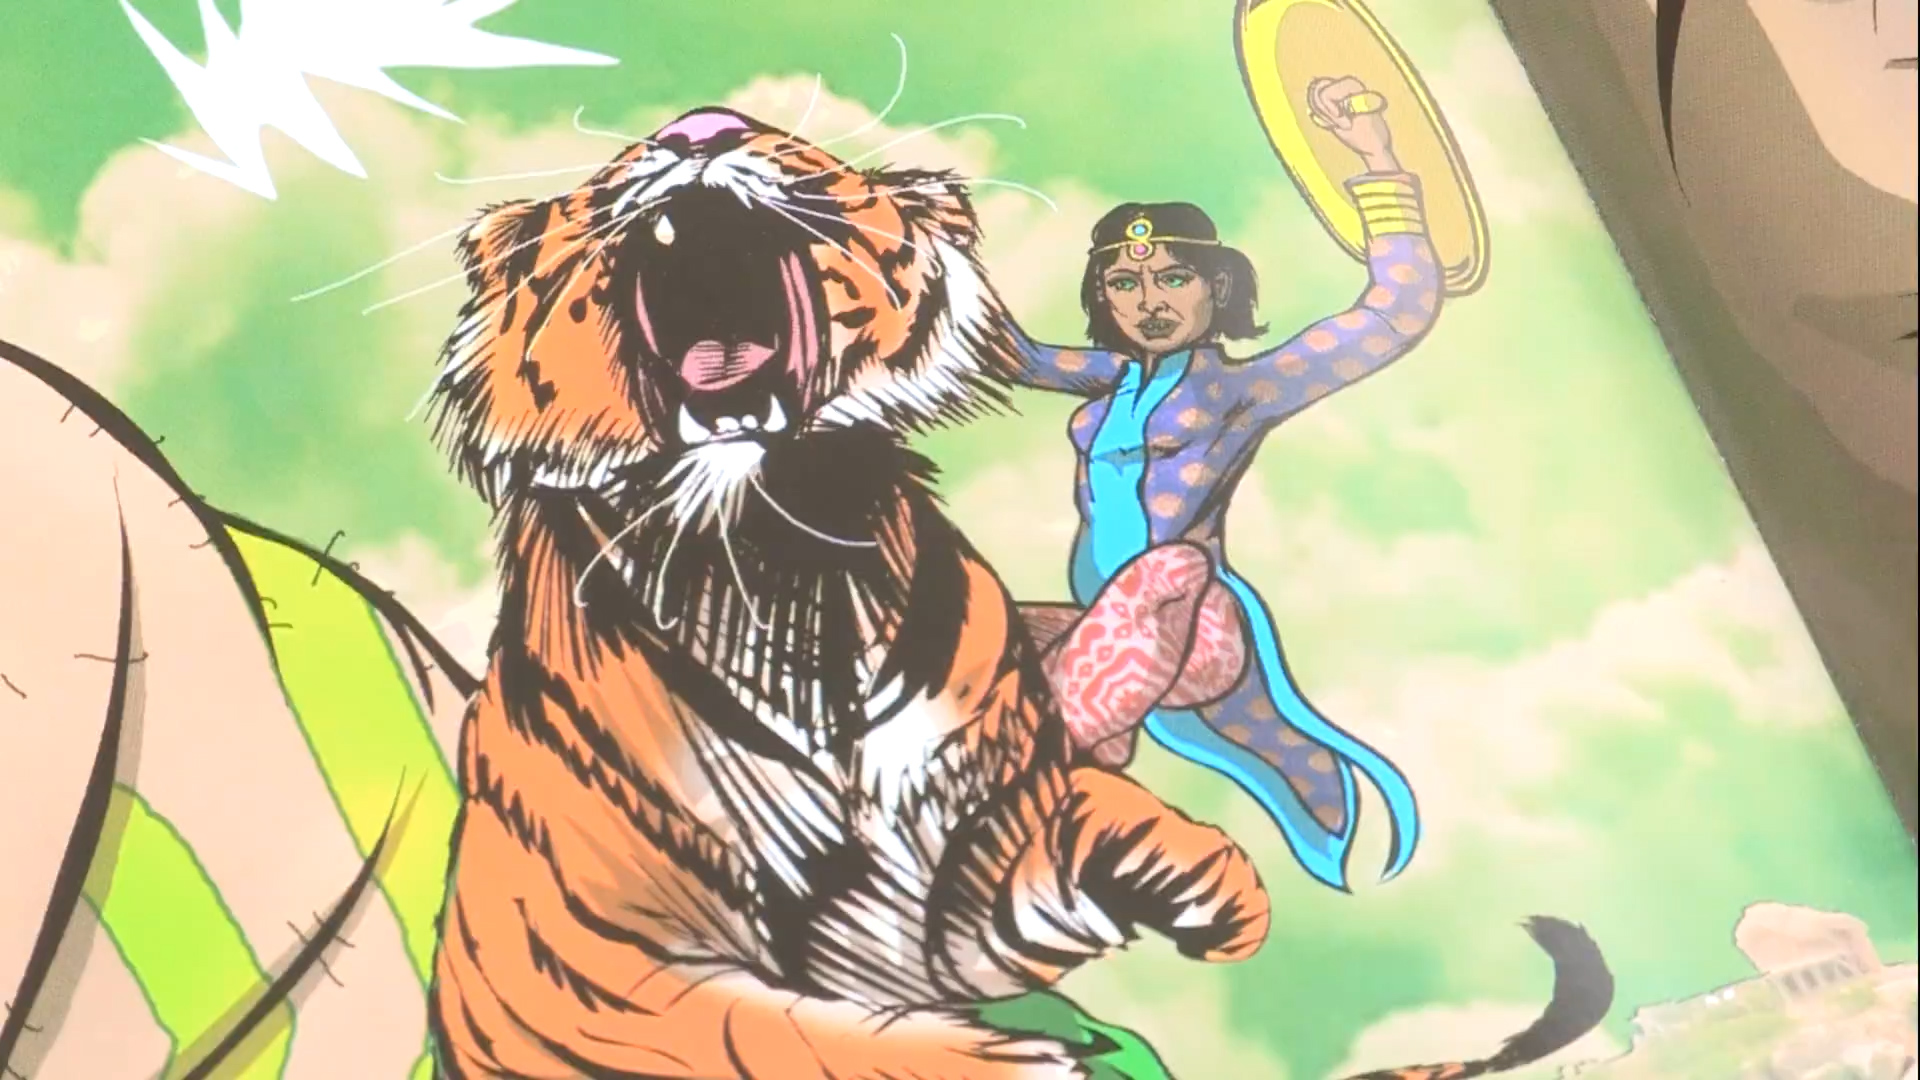 Comic book creator hopes to change minds in India